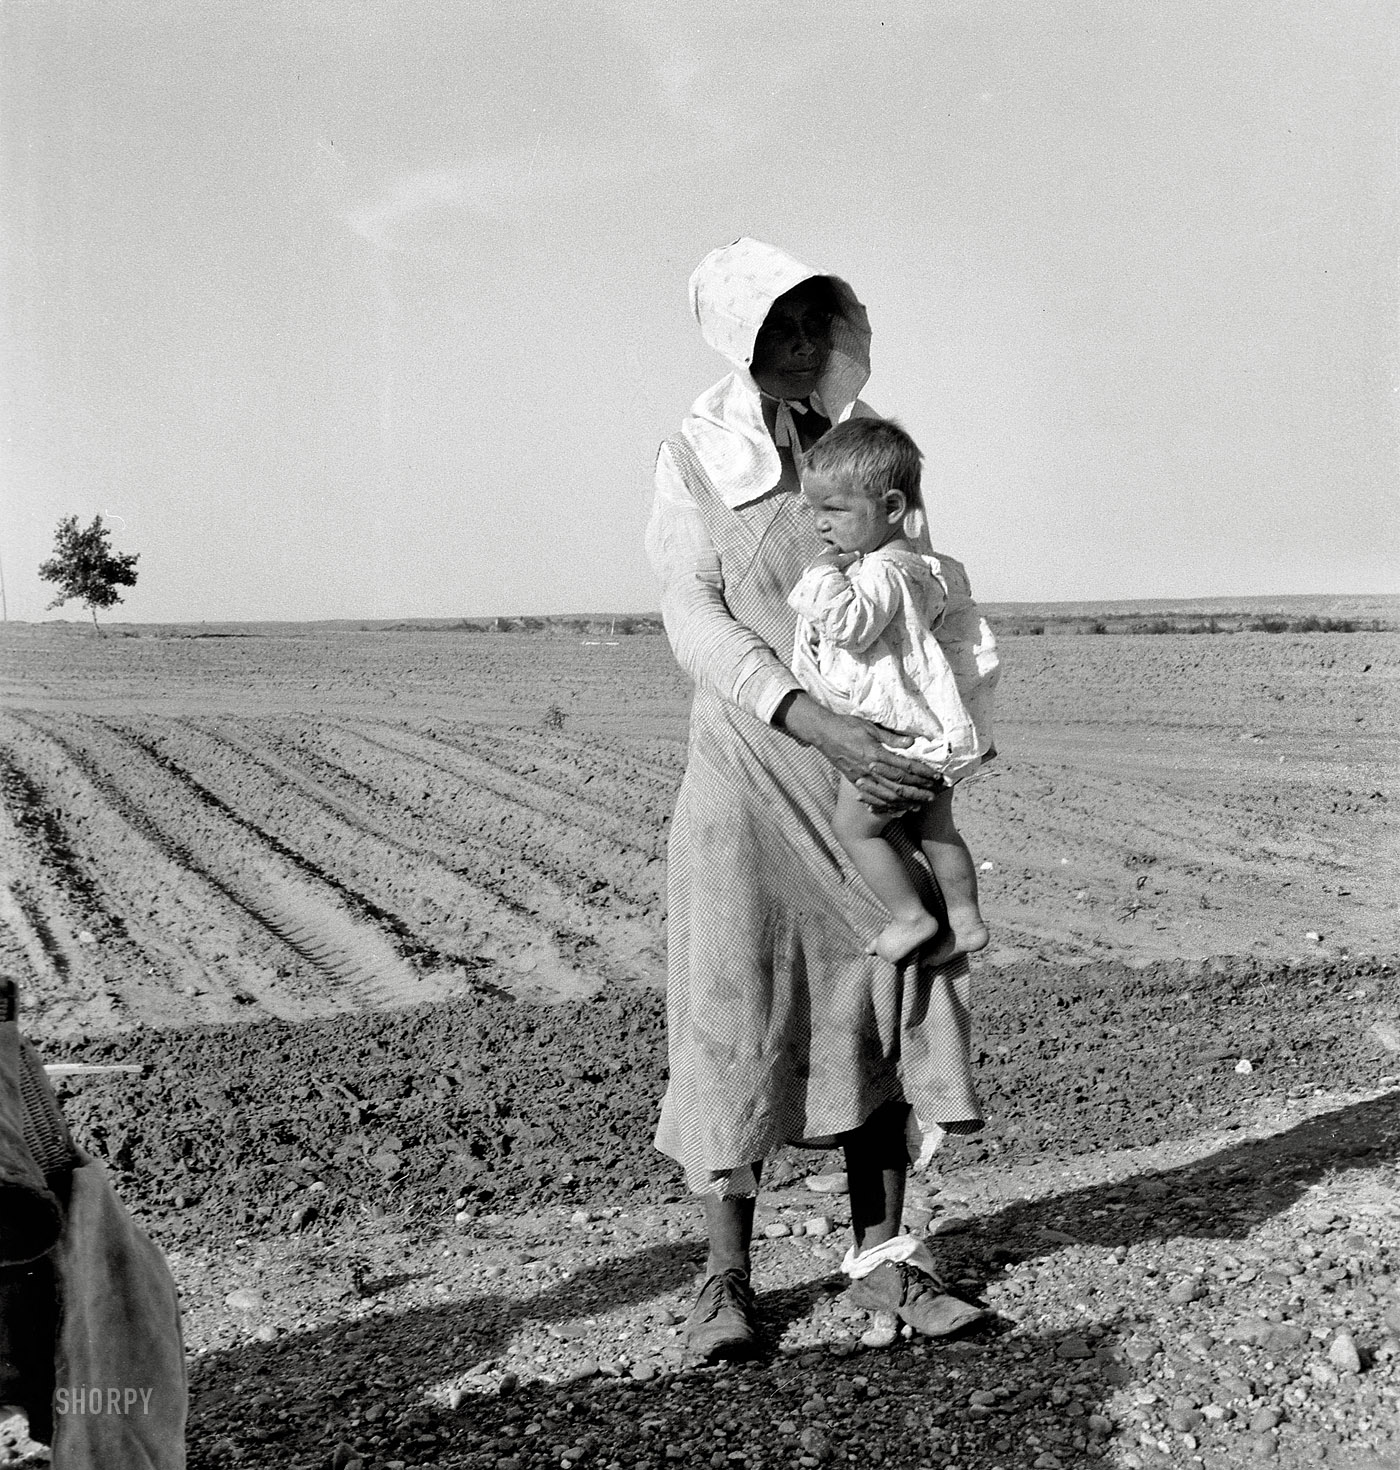 May 1937. "Mother and child of Arkansas flood refugee family near Memphis, Texas. These people, with all their earthly belongings, are bound for the lower Rio Grande Valley, where they hope to pick cotton." Medium-format nitrate negative by Dorothea Lange for the Resettlement Administration. View full size.